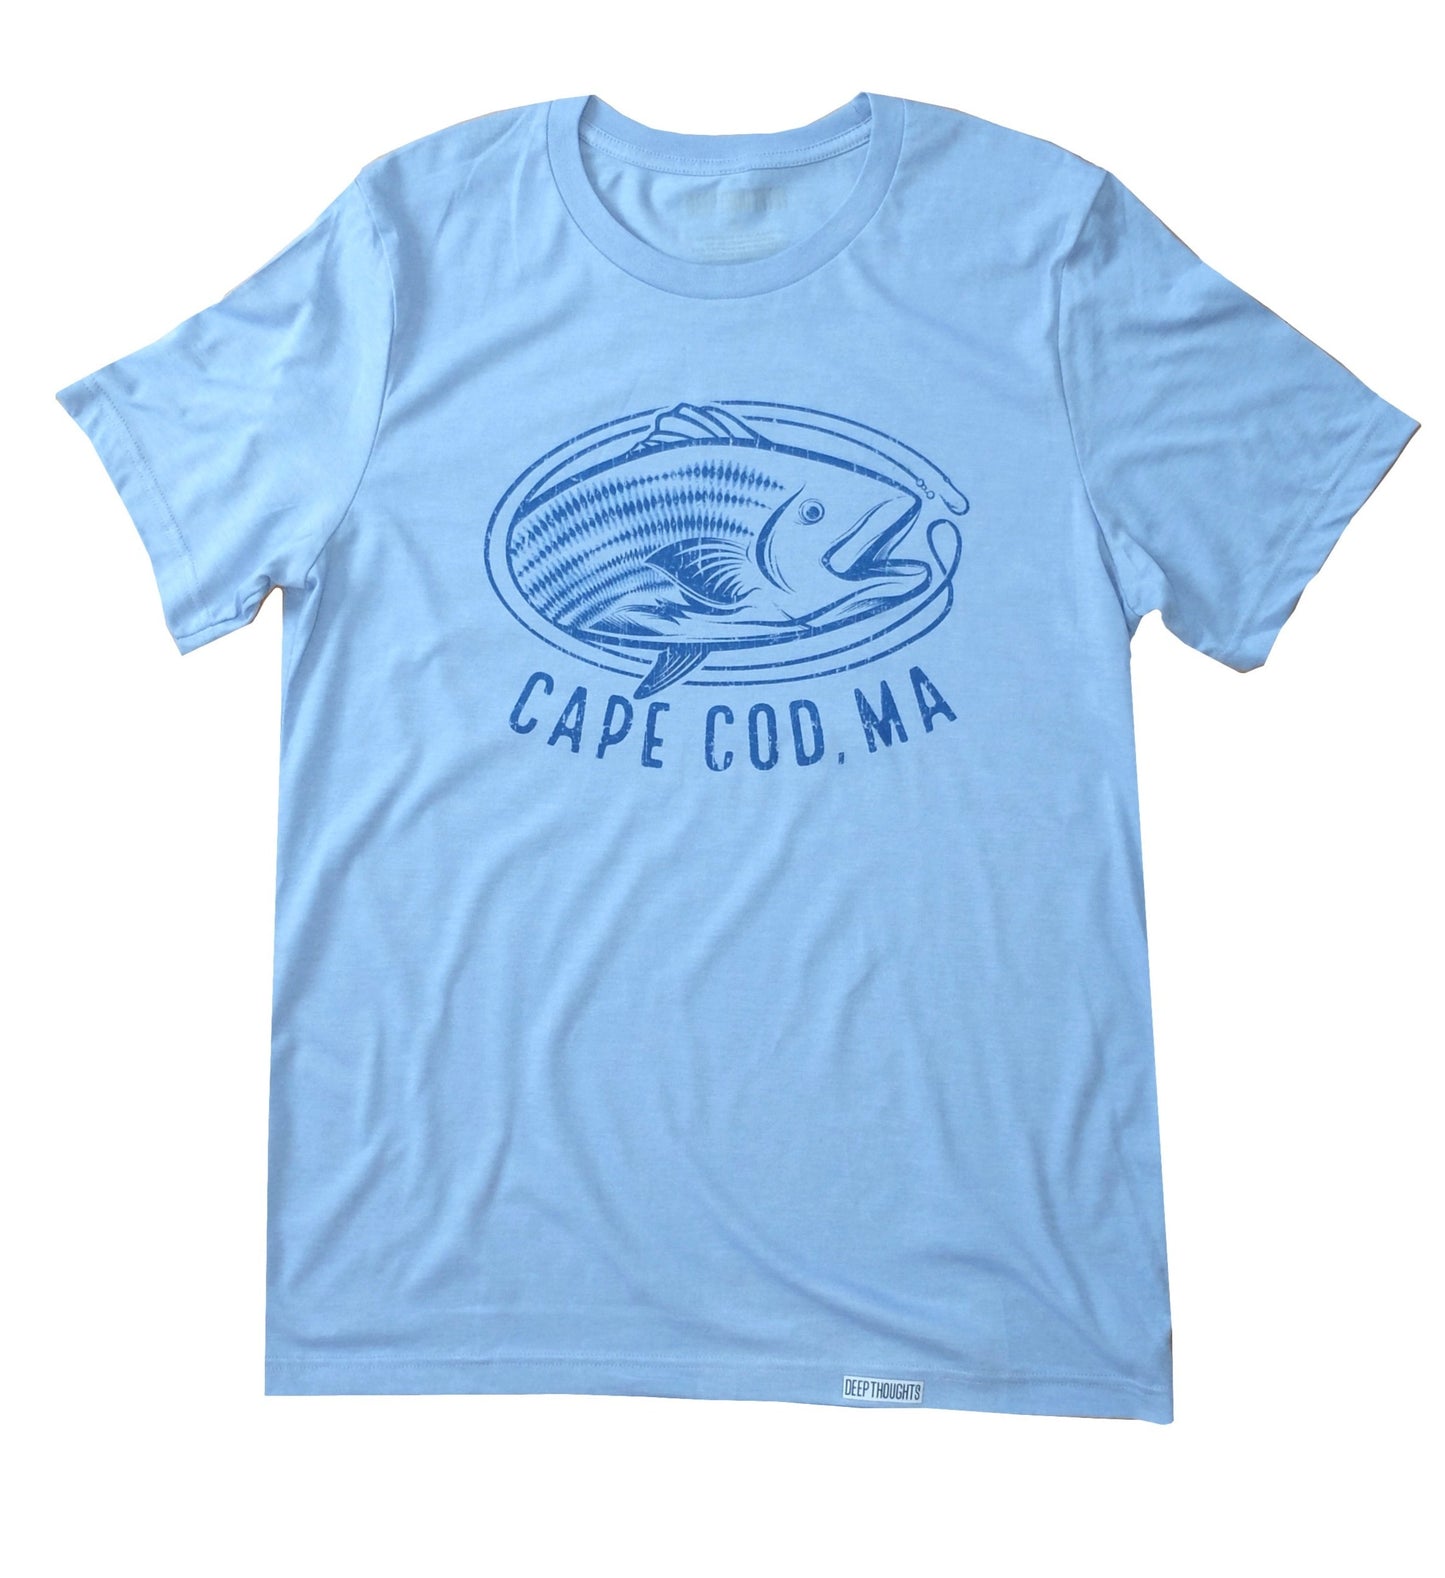 light heather blue soft cotton blend tee with blue vintage style oval-shaped striped bass fishing graphic and 'Cape Cod' text